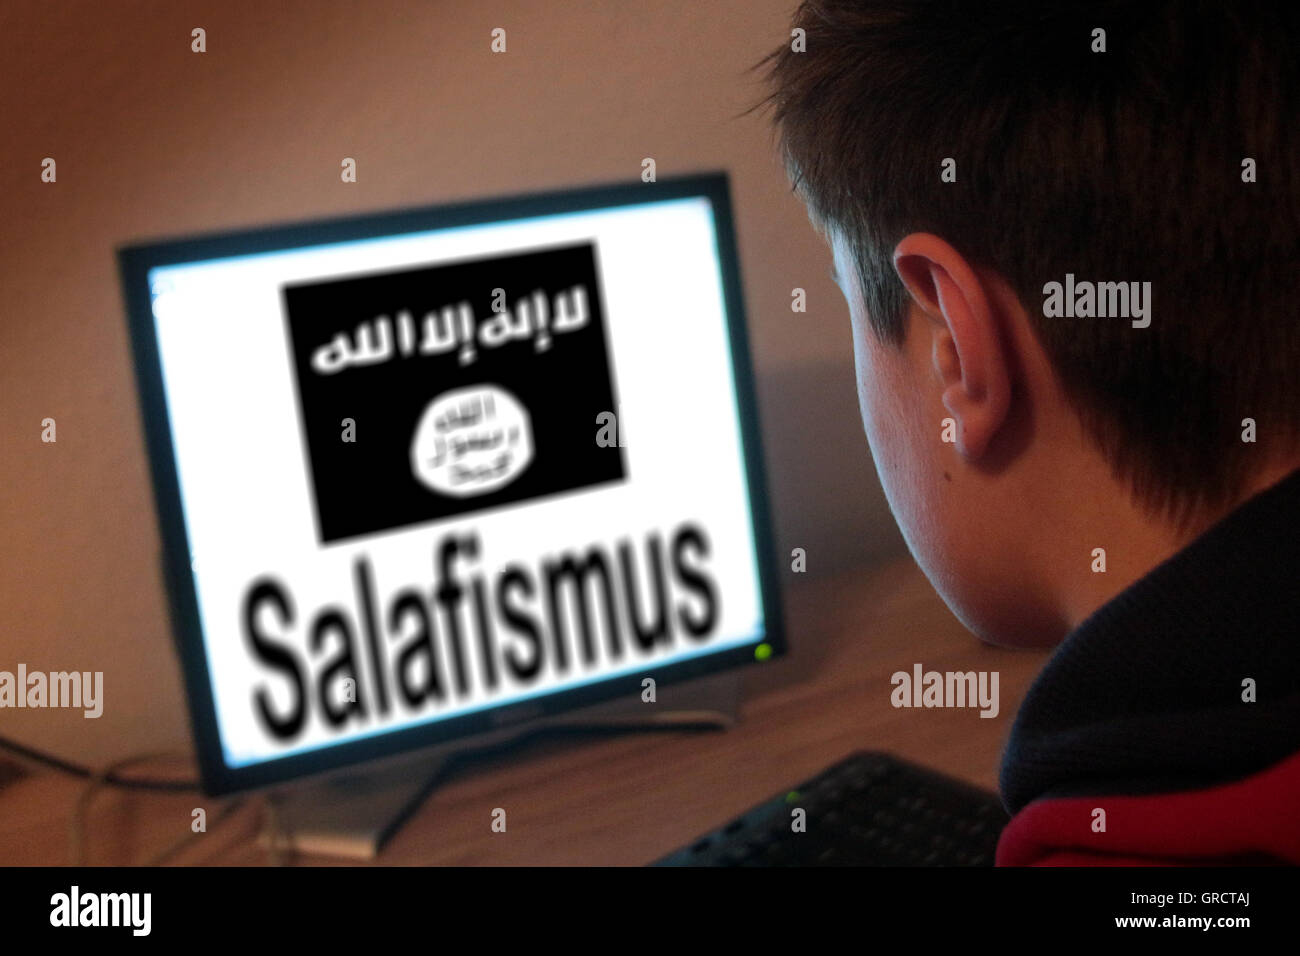 Teenager Sitting In Front Of A Computer With Sign Of Is Islamic State Salafism Stock Photo